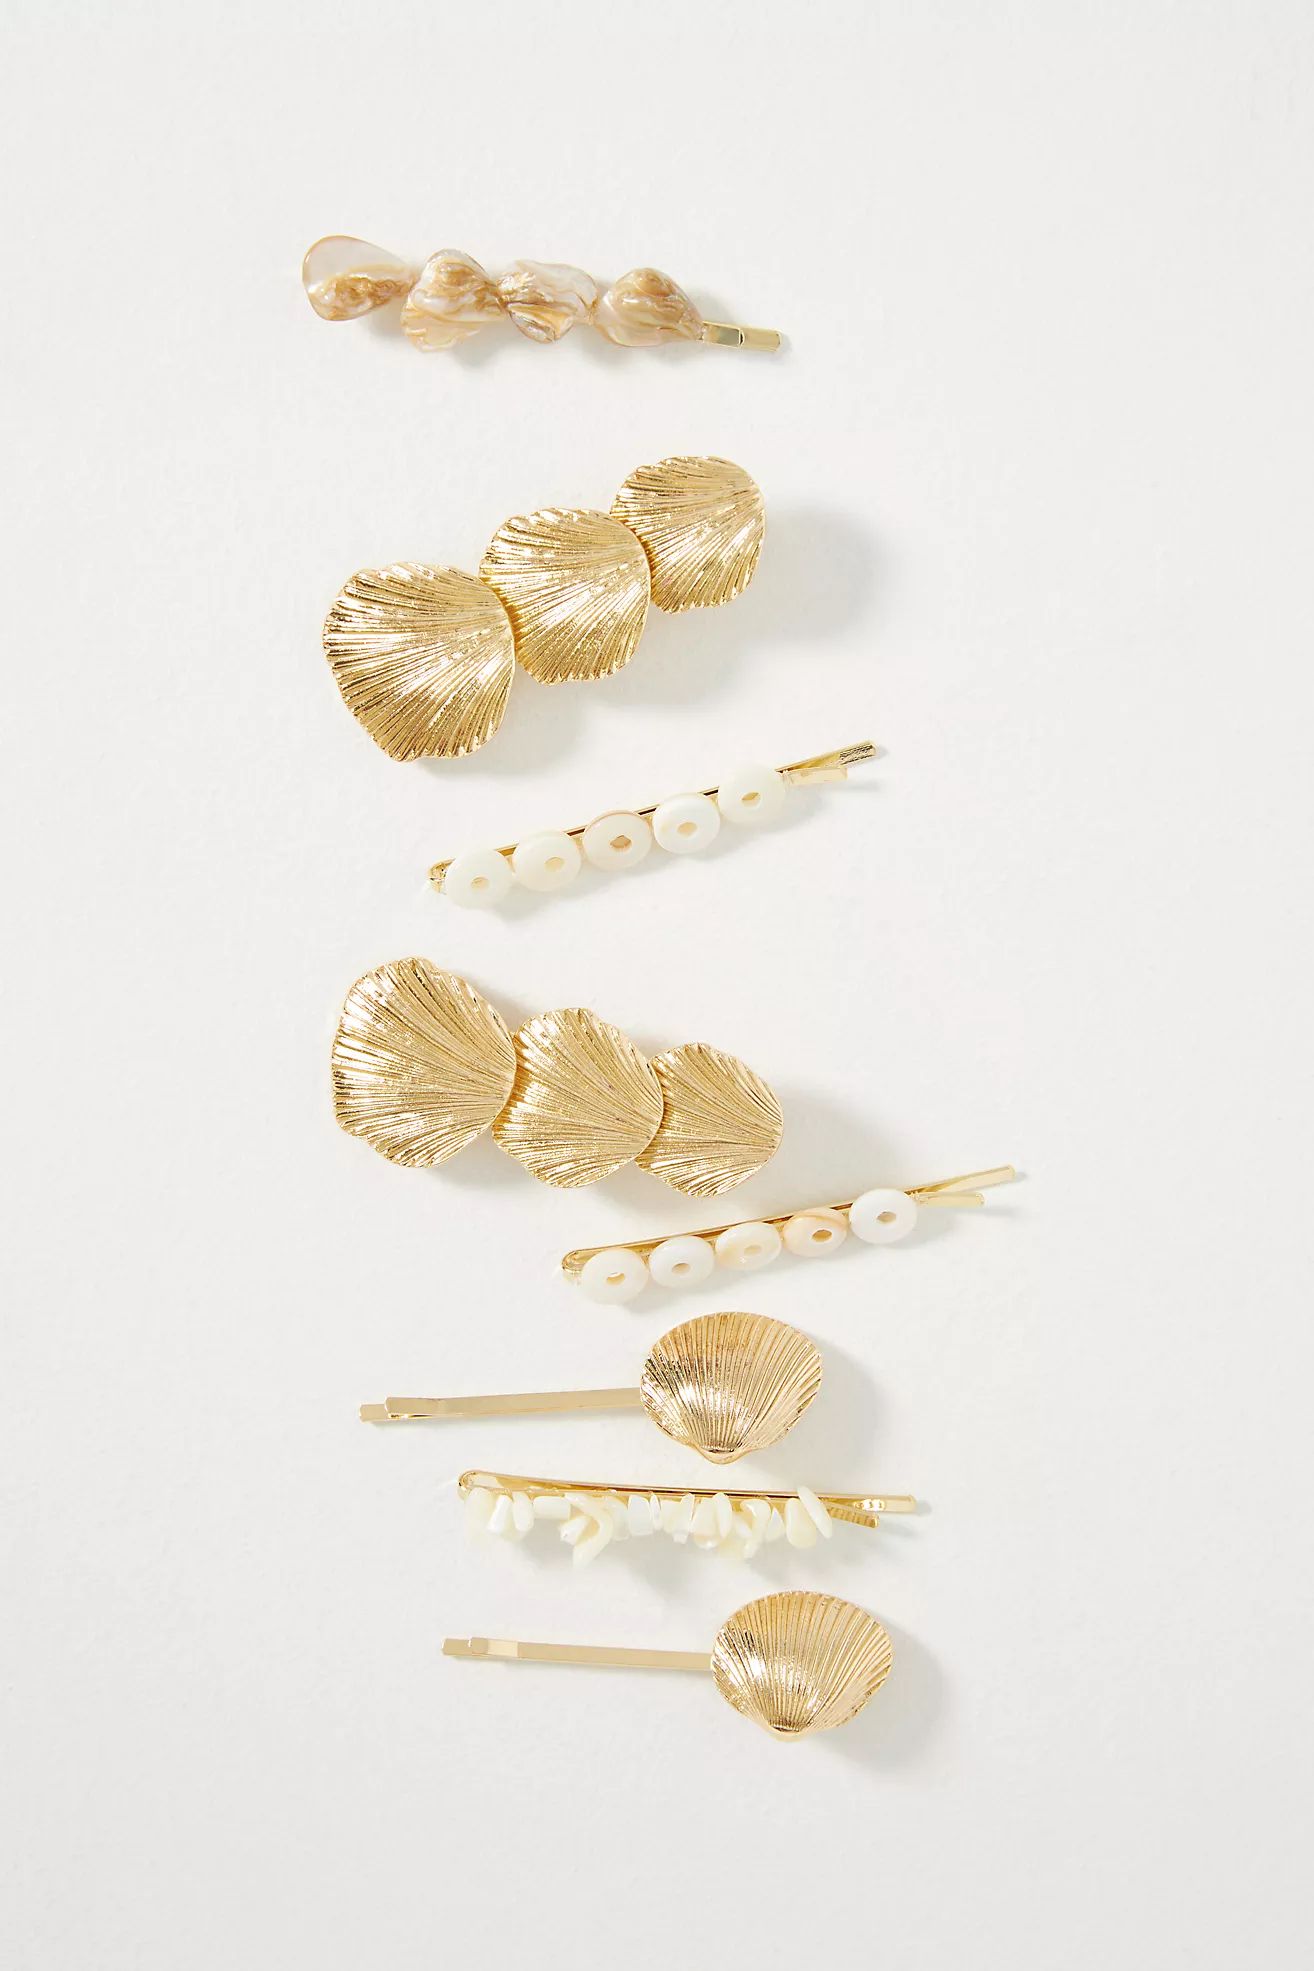 Assorted Shell Barrettes, Set of 6 | Anthropologie (US)